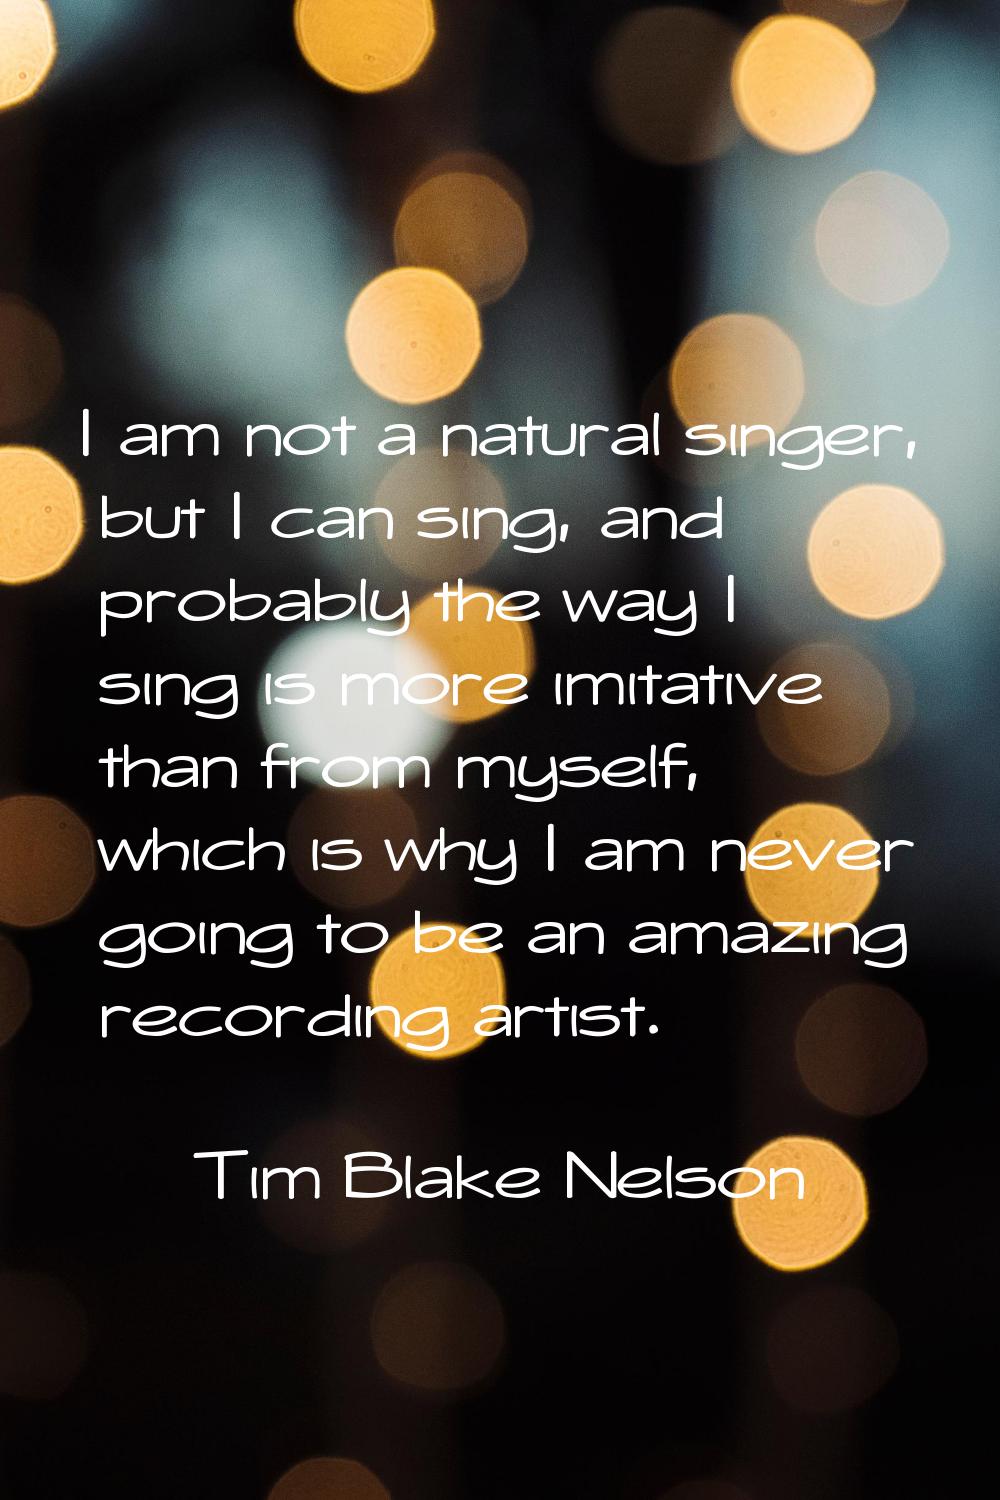 I am not a natural singer, but I can sing, and probably the way I sing is more imitative than from 